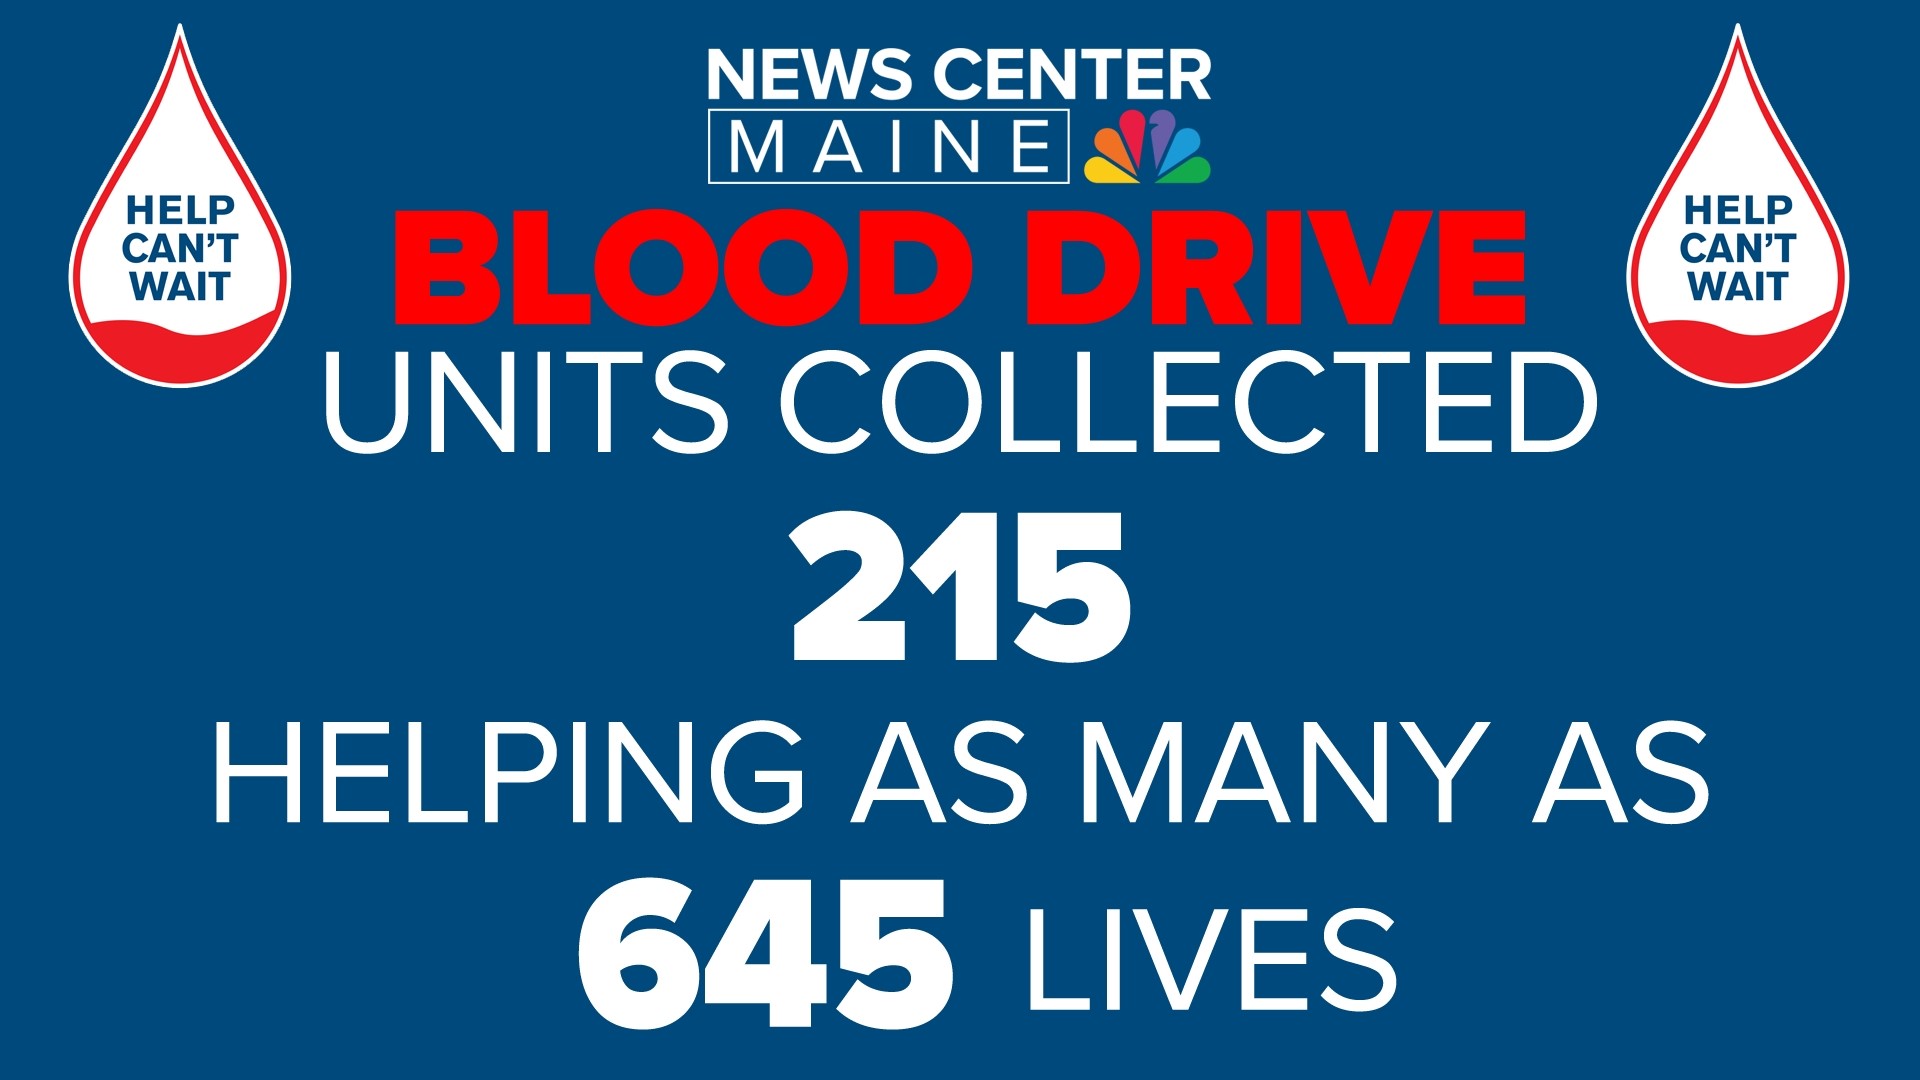 A total of 215 units of blood were collected, helping save as many as 645 lives.